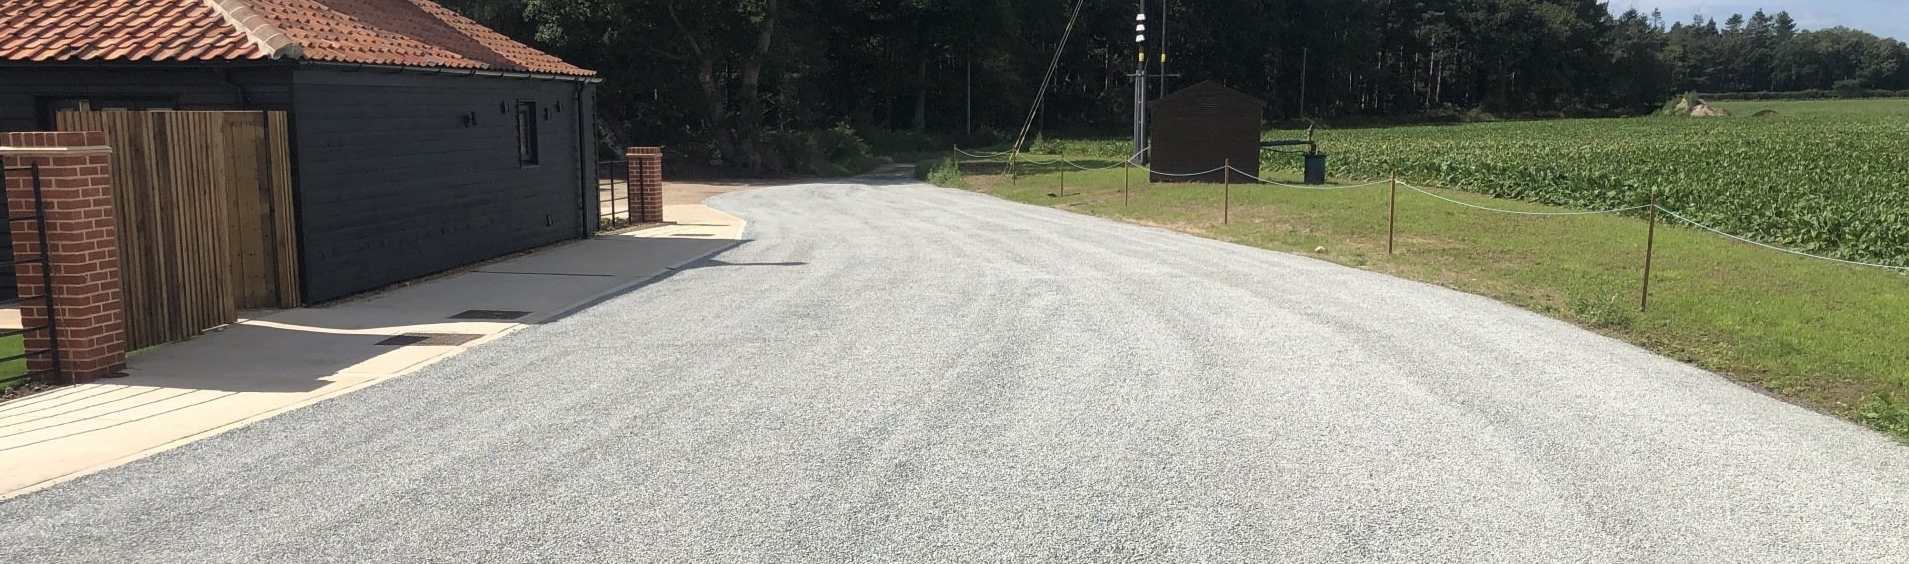 Michael_Pope_Road_Surfacing_Commercial_Driveway_Surfacing